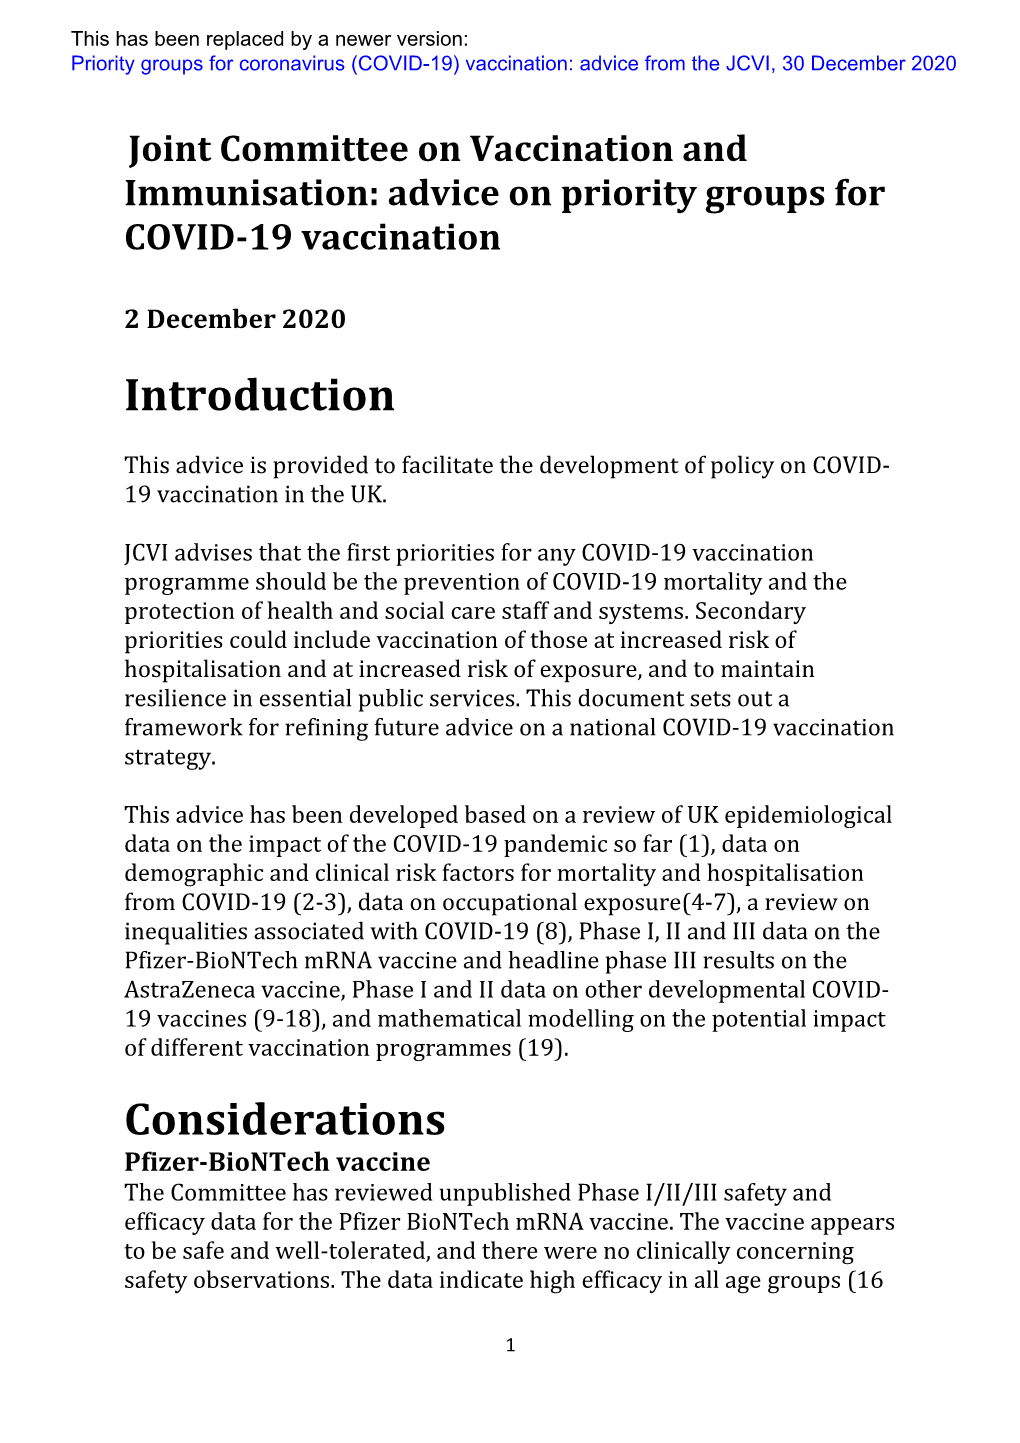 JCVI Advice on Priority Groups for COVID-19 Vaccination